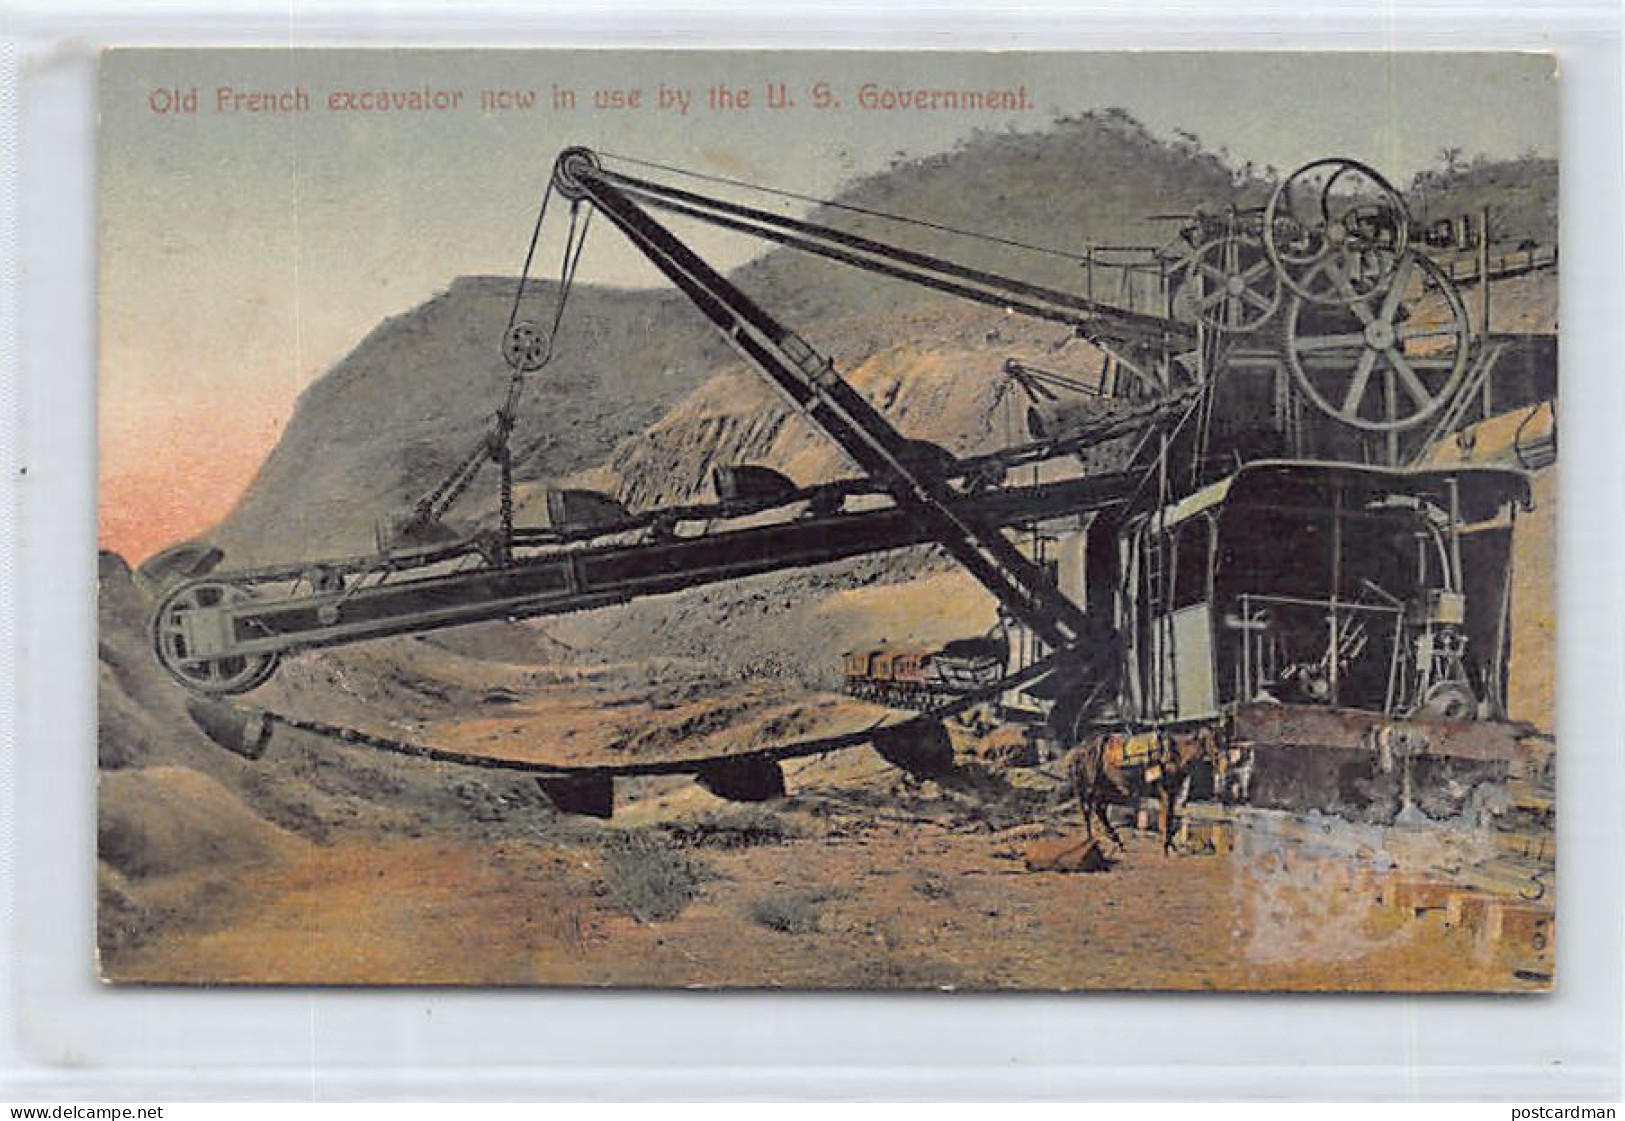 PANAMA CANAL - Old French Excavator Now In Use By The U.S. Government - SEE SCANS FOR CONDITION - Publ. I. L. Maduro Jr. - Panamá